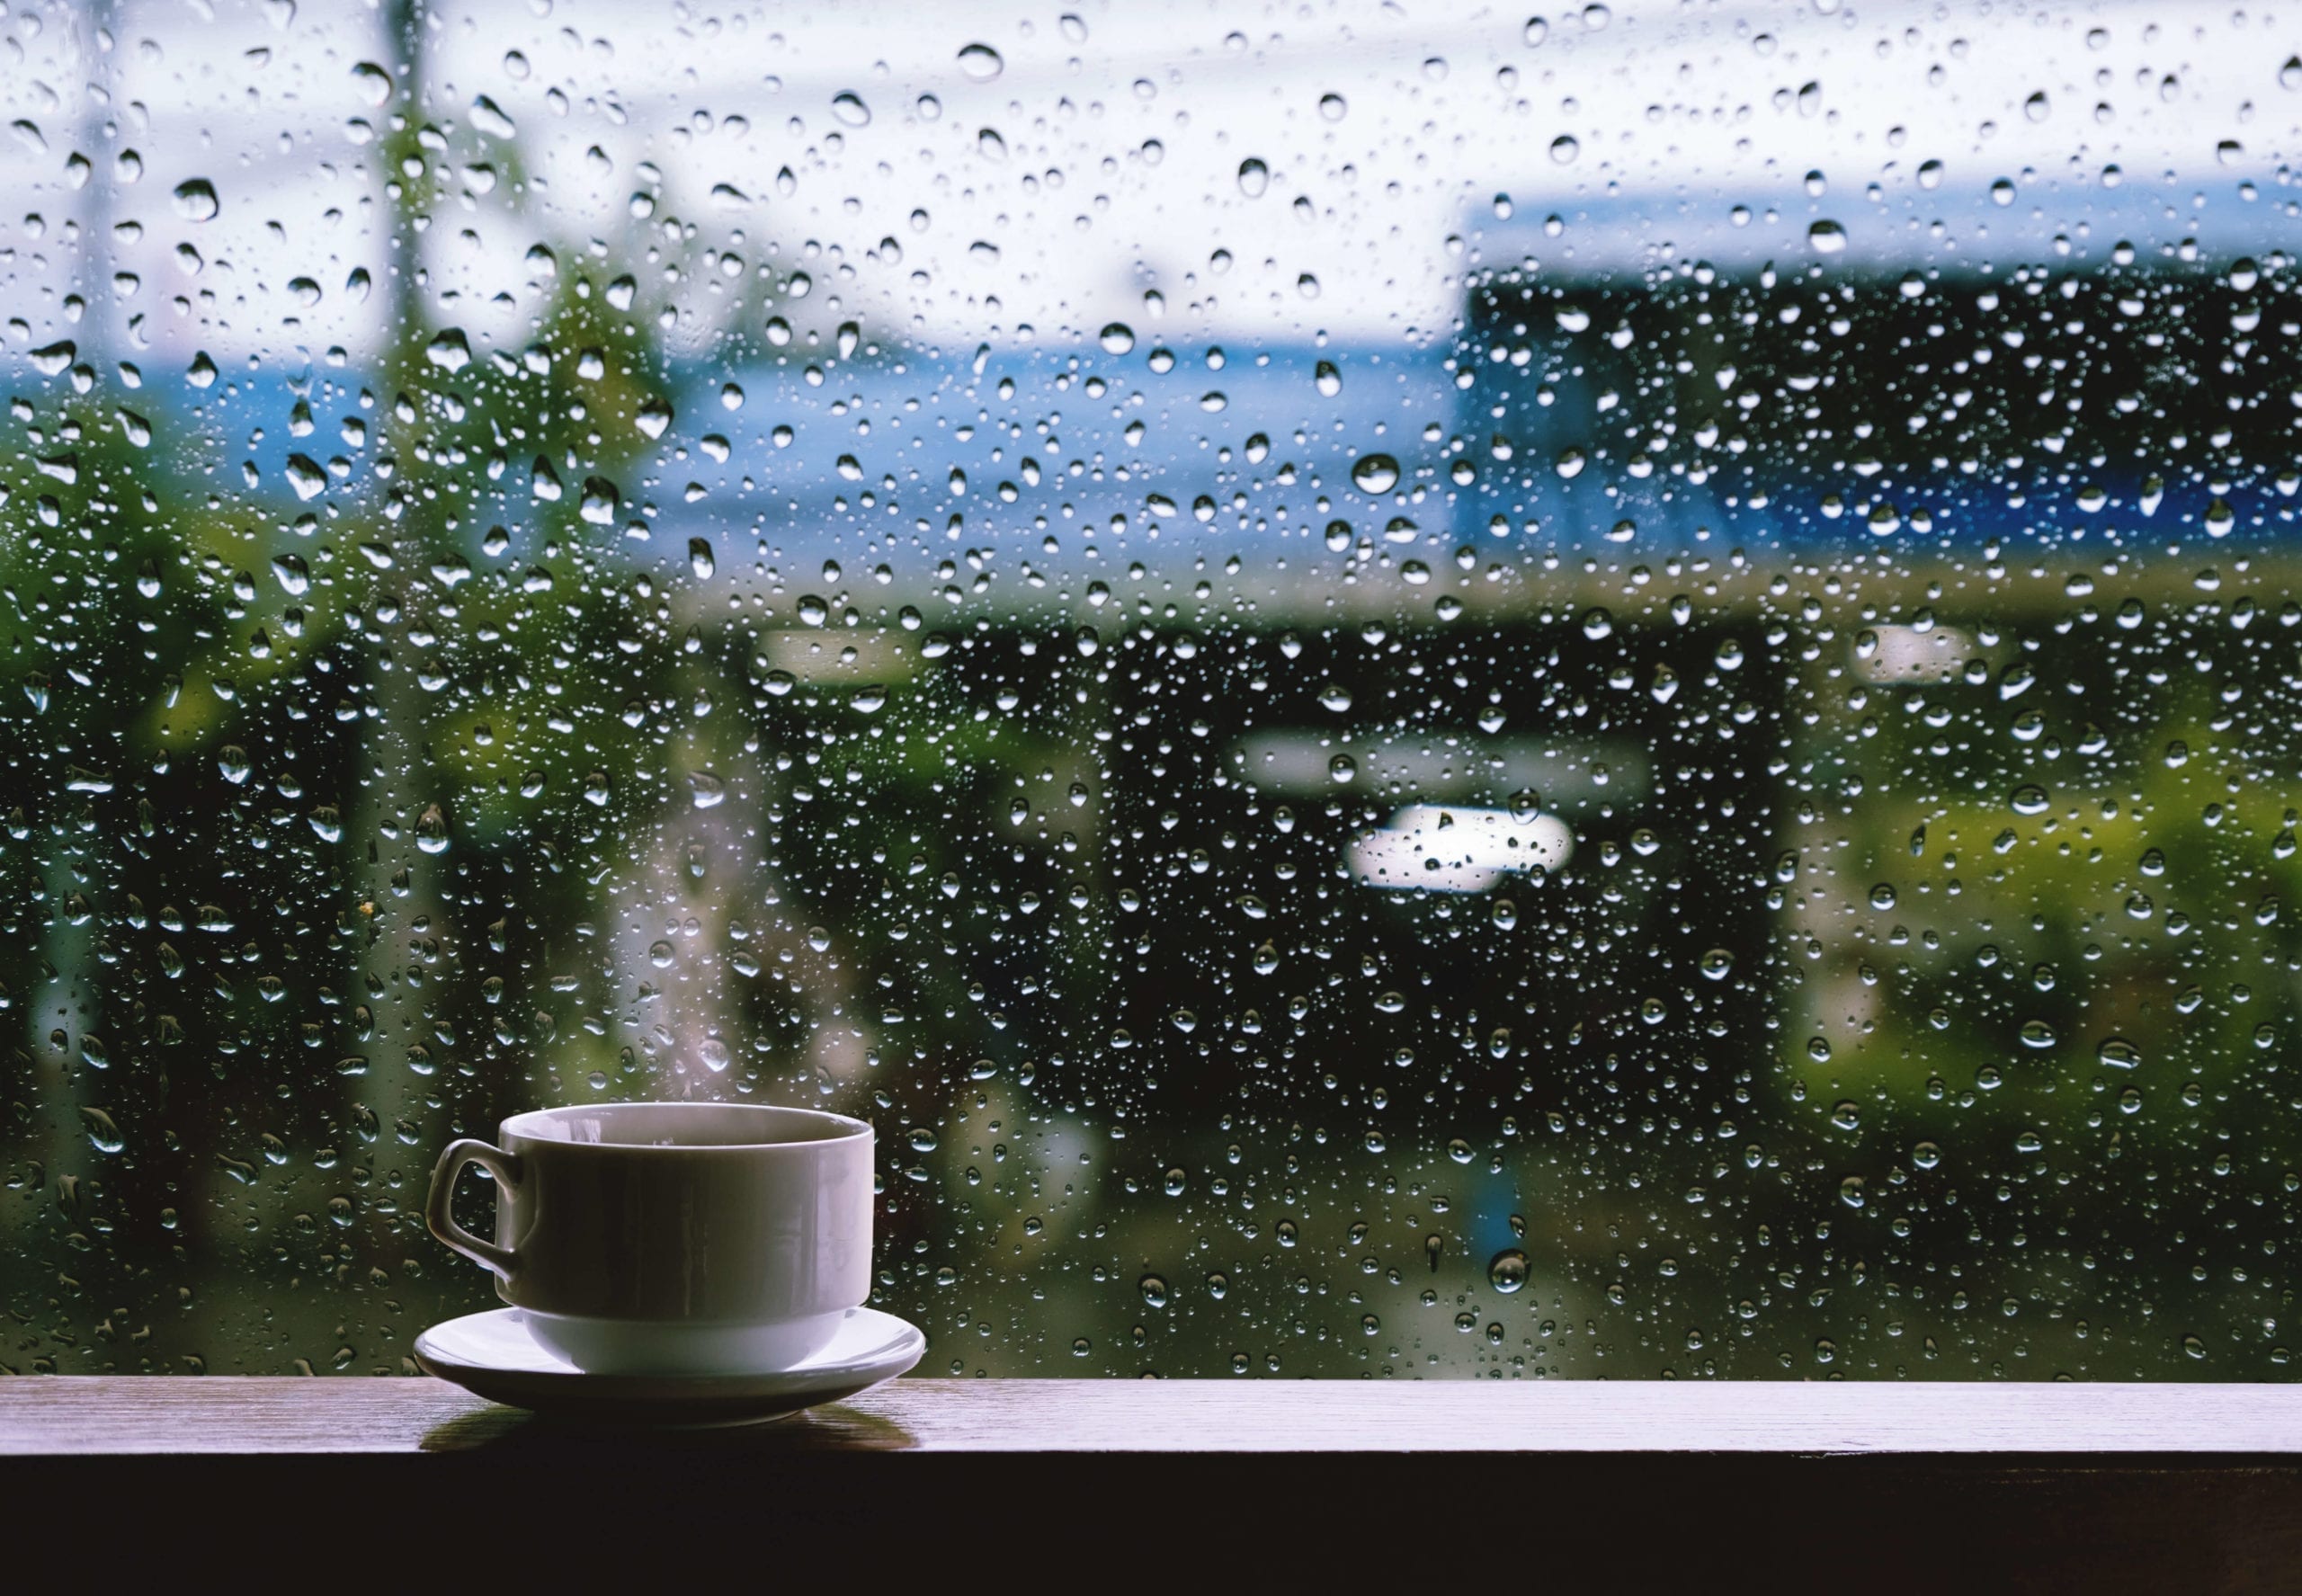 The Quest to Enjoy a Rainy Day and Tiny Happy Things